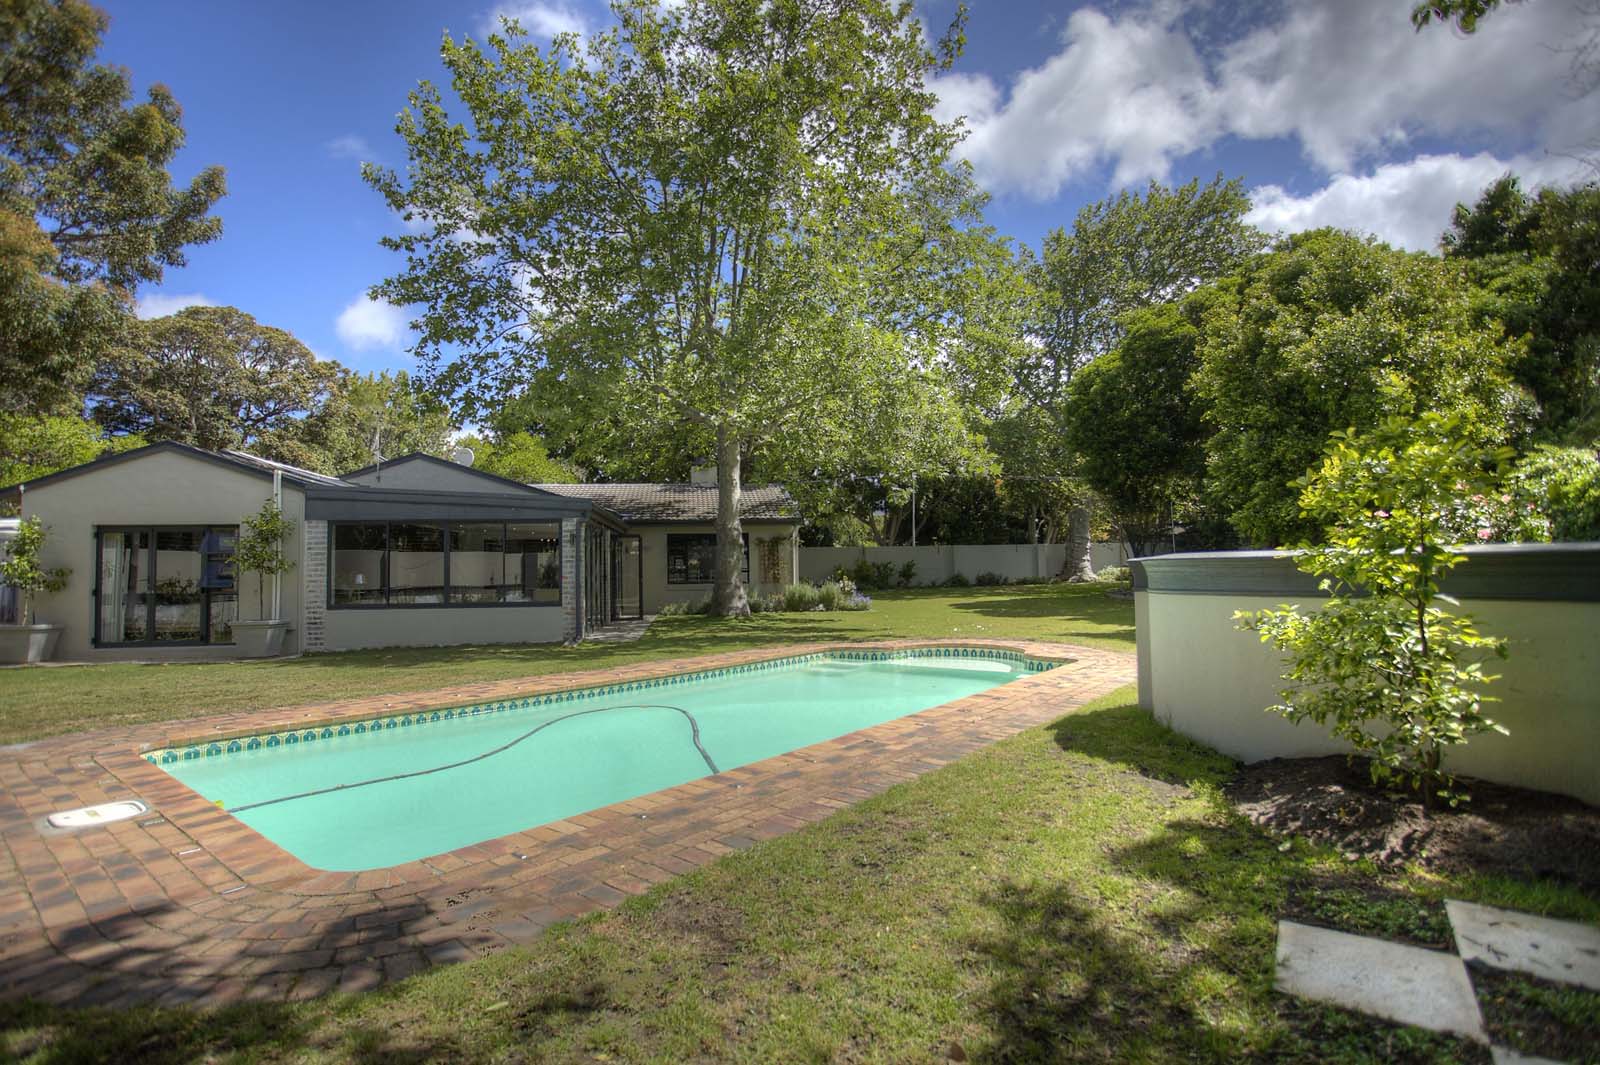 Photo 1 of Villa Robertson accommodation in Constantia, Cape Town with 4 bedrooms and 3 bathrooms